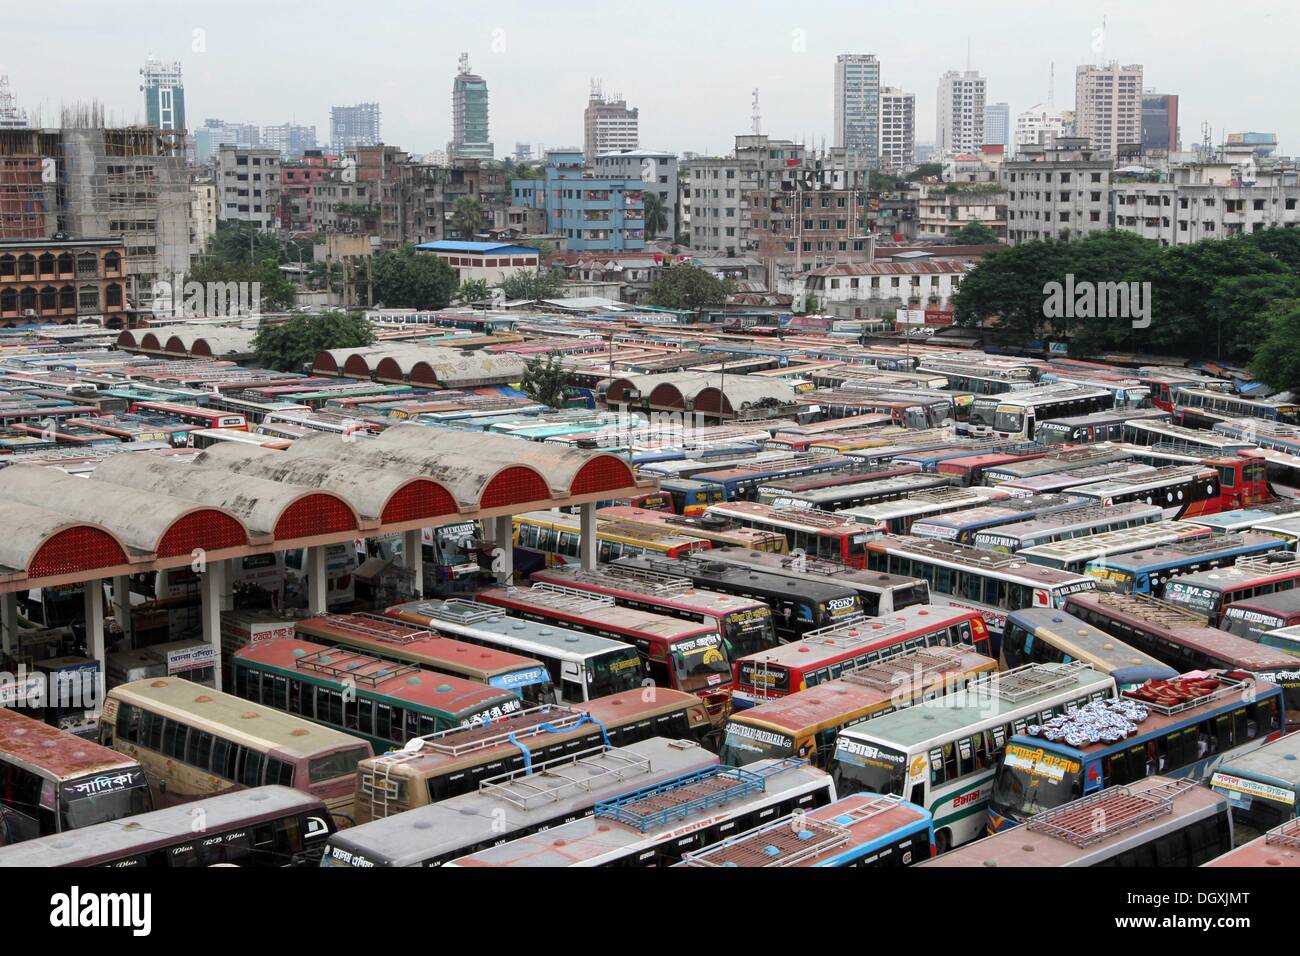 Dhaka, Bangladesh. 27th Oct, 2013. Buses are parked at an inter-district bus during a nationwide strike called by the opposition Bangladesh Nationalist Party (BNP) in Dhaka on October 27, 2013. Three people were killed in nationwide clashes as Bangladesh's opposition began a strike to demand the prime minister quit and make way for polls under a caretaker government. Stock Photo